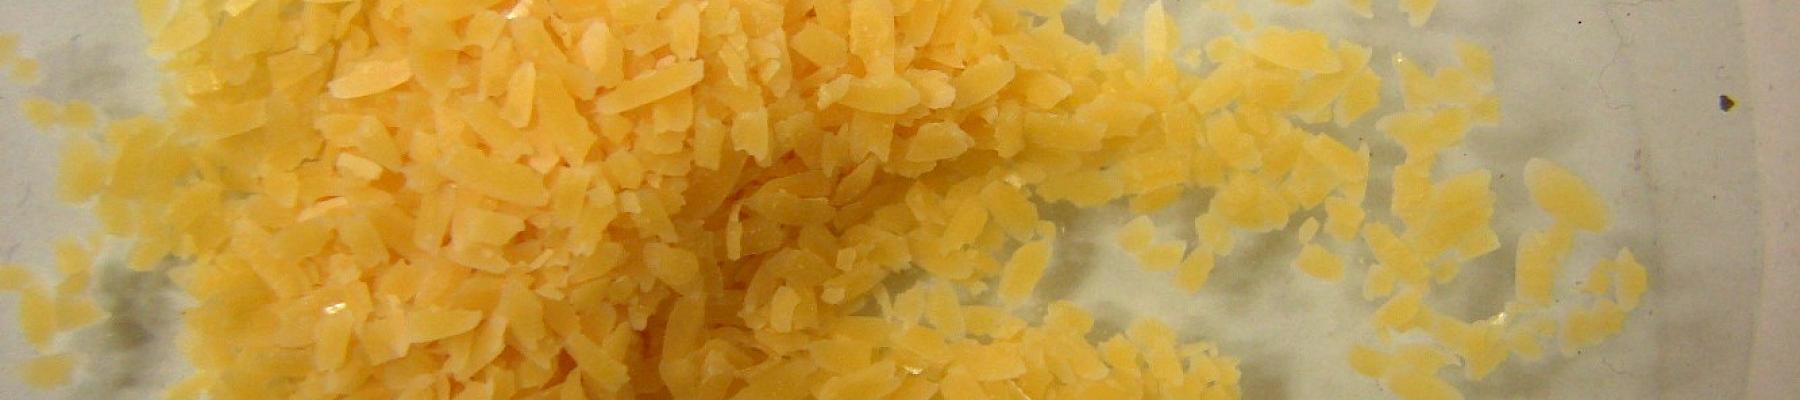 Candelilla Wax – Oregon Trail Soapers Supply